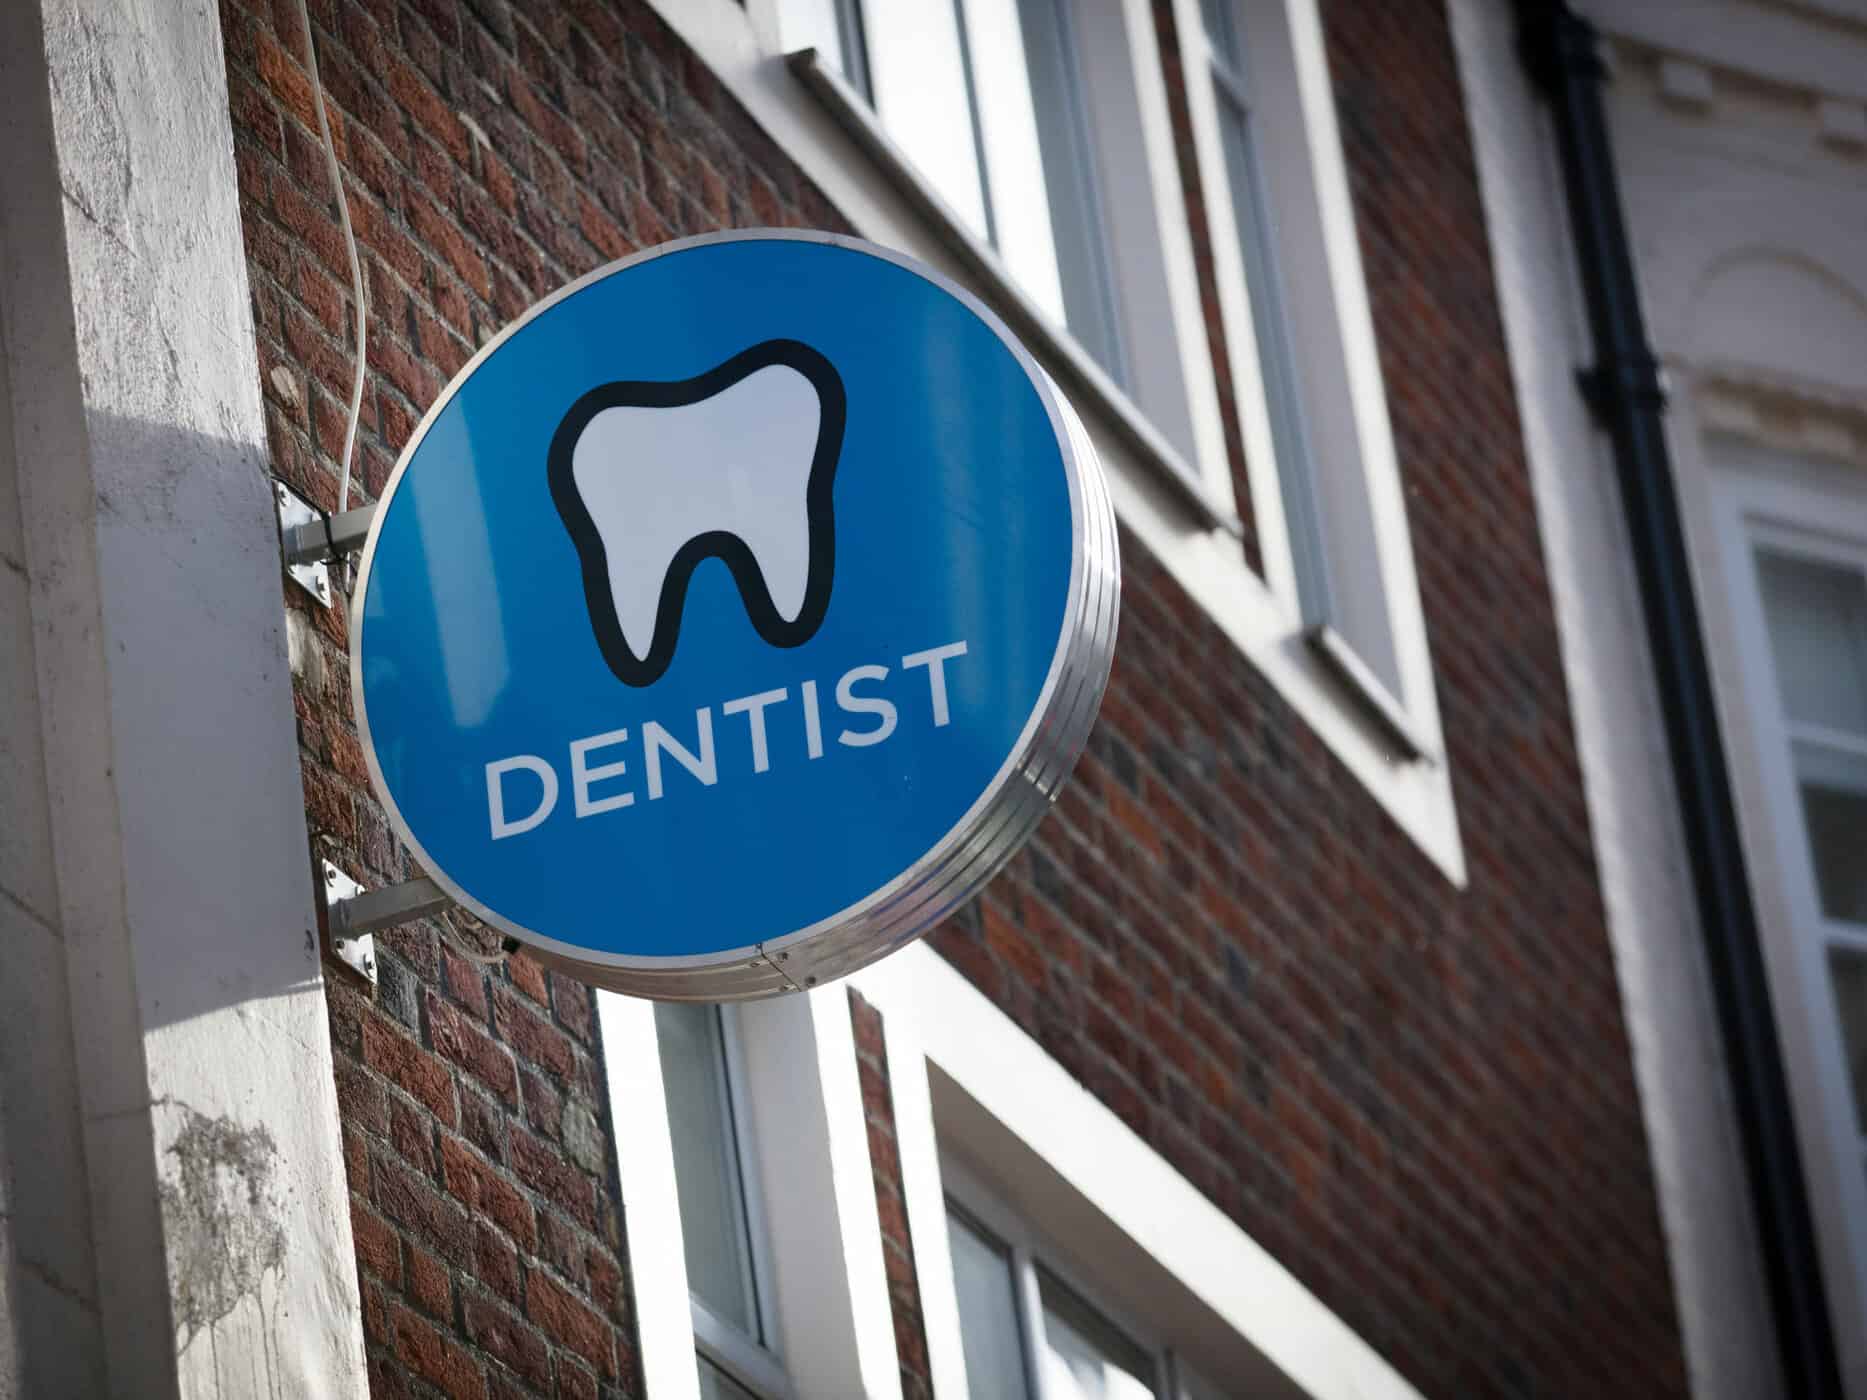 Do you have authentic dental branding? The reviews are in.